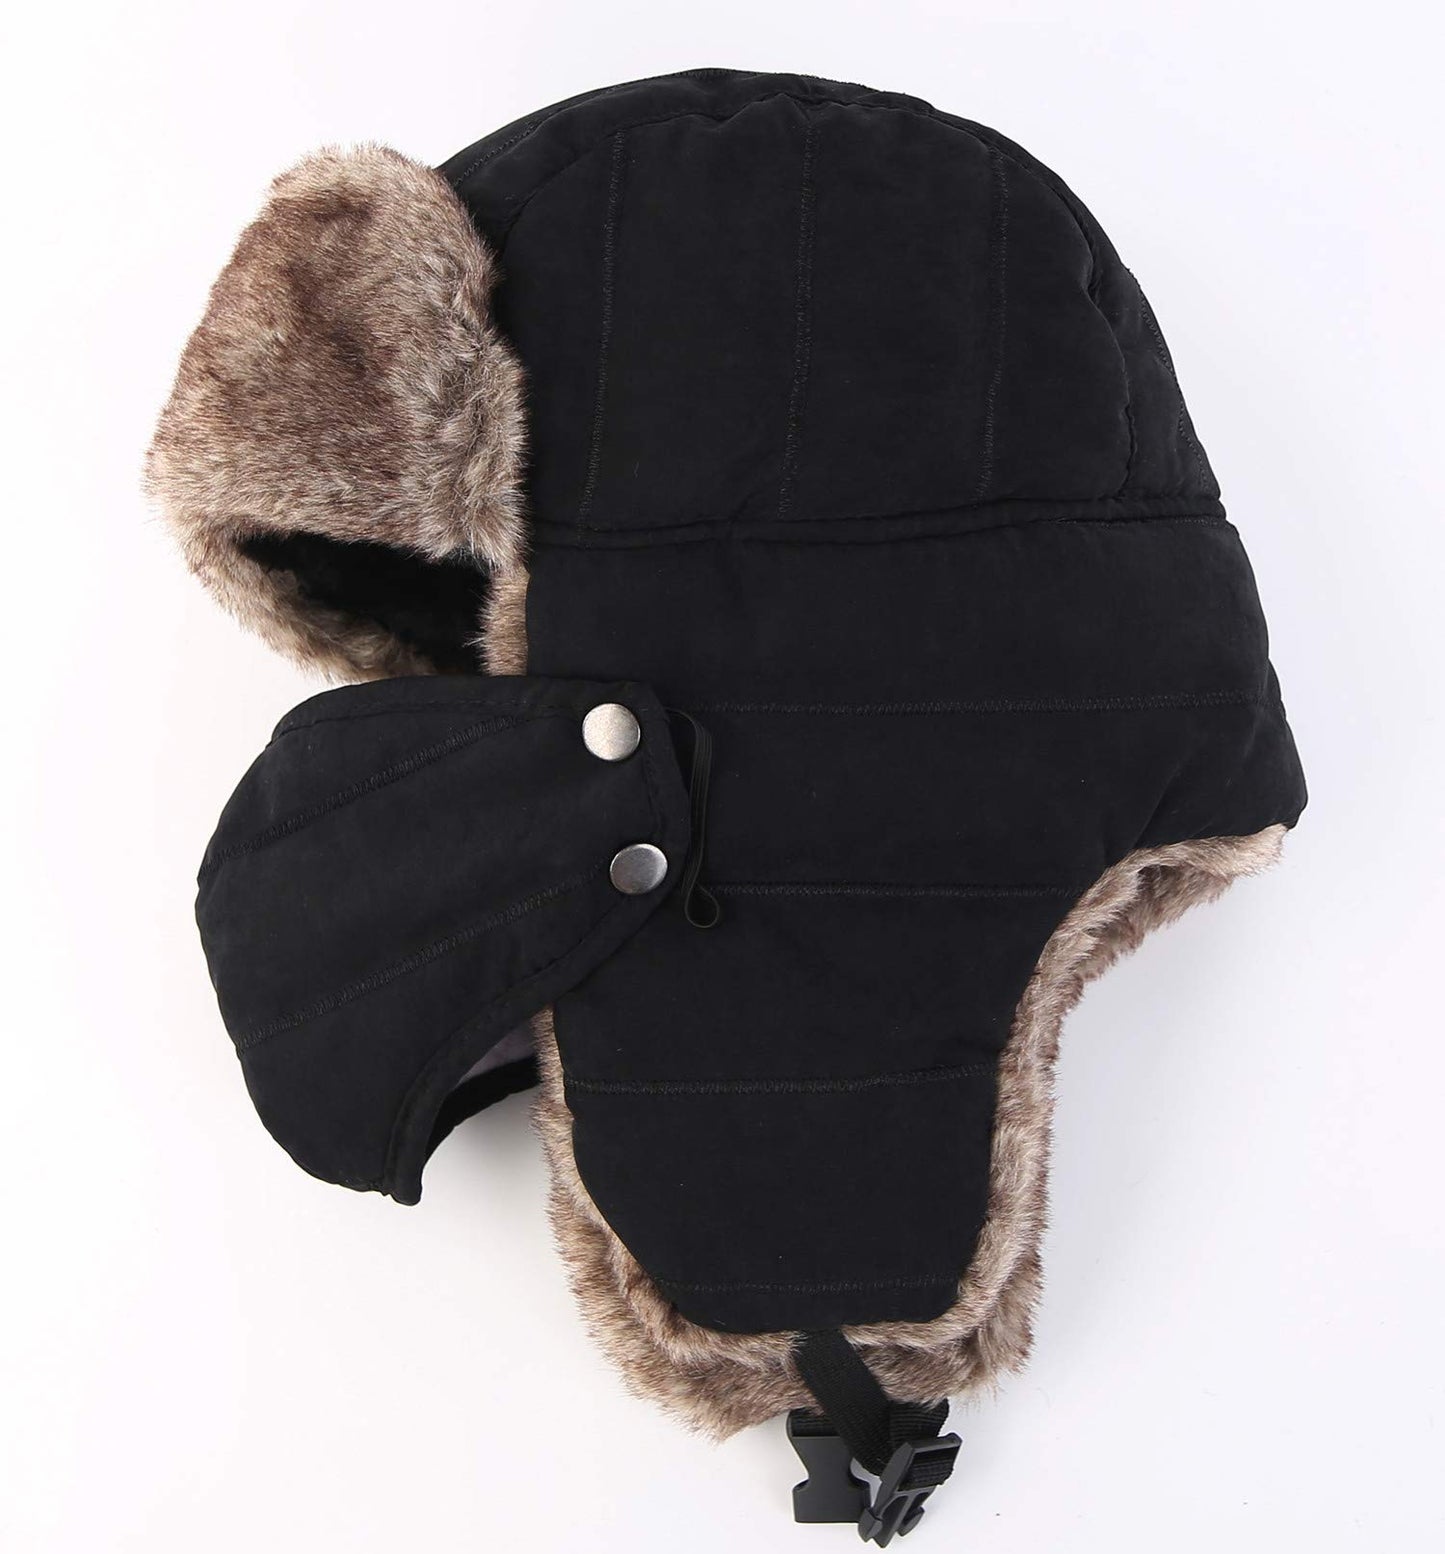 Hat Warm Winter Hunting Hats with Ear Flaps Mask